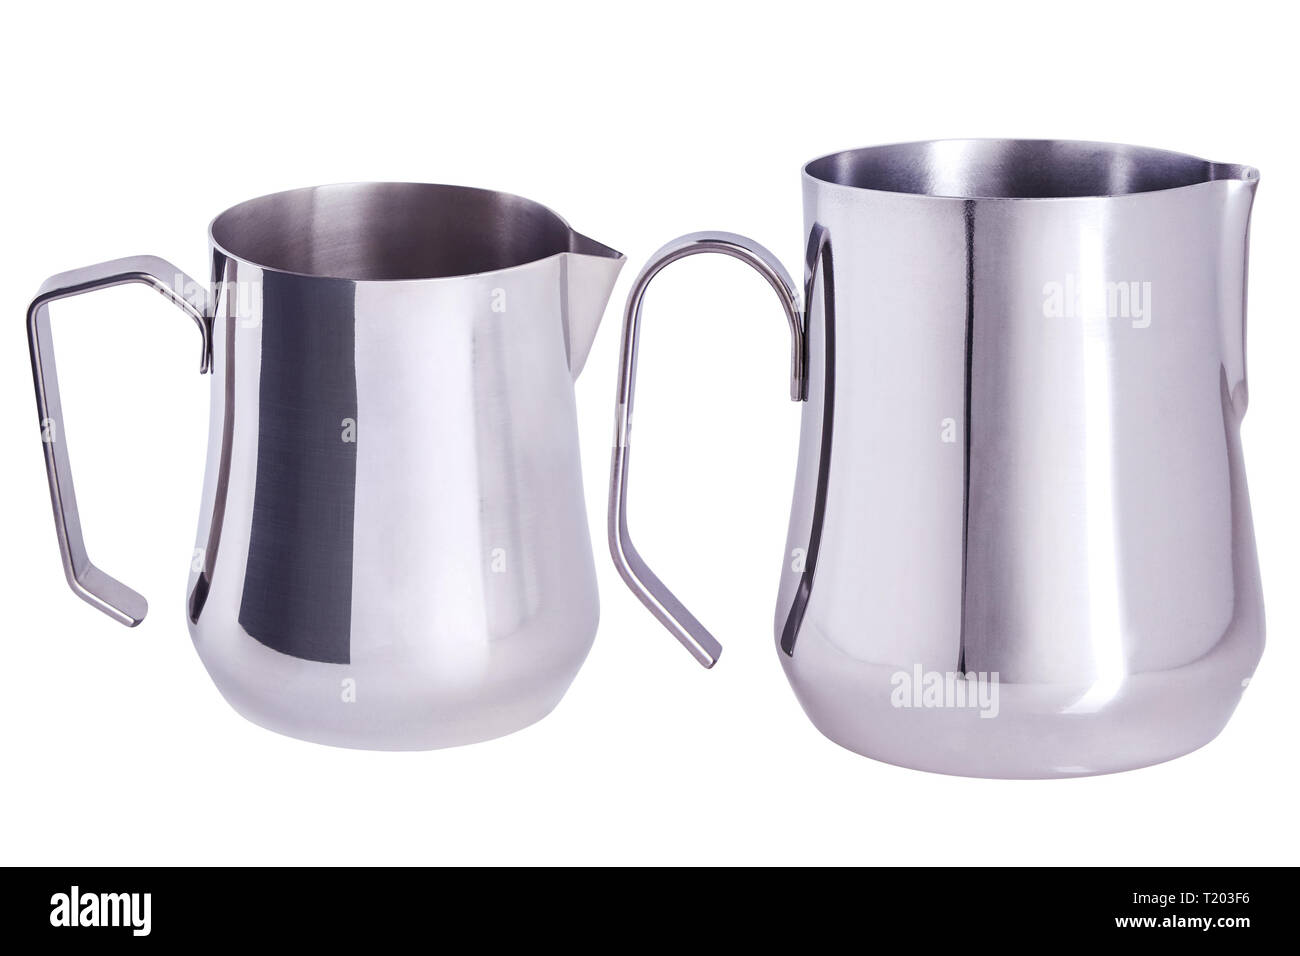 Stainless Steeel Milk Frothing Pitcher Cup Tool Barista Tools Coffee Moka  Cappuccino Latte Milk Frothing Jug Coffee Tool - buy Stainless Steeel Milk  Frothing Pitcher Cup Tool Barista Tools Coffee Moka Cappuccino